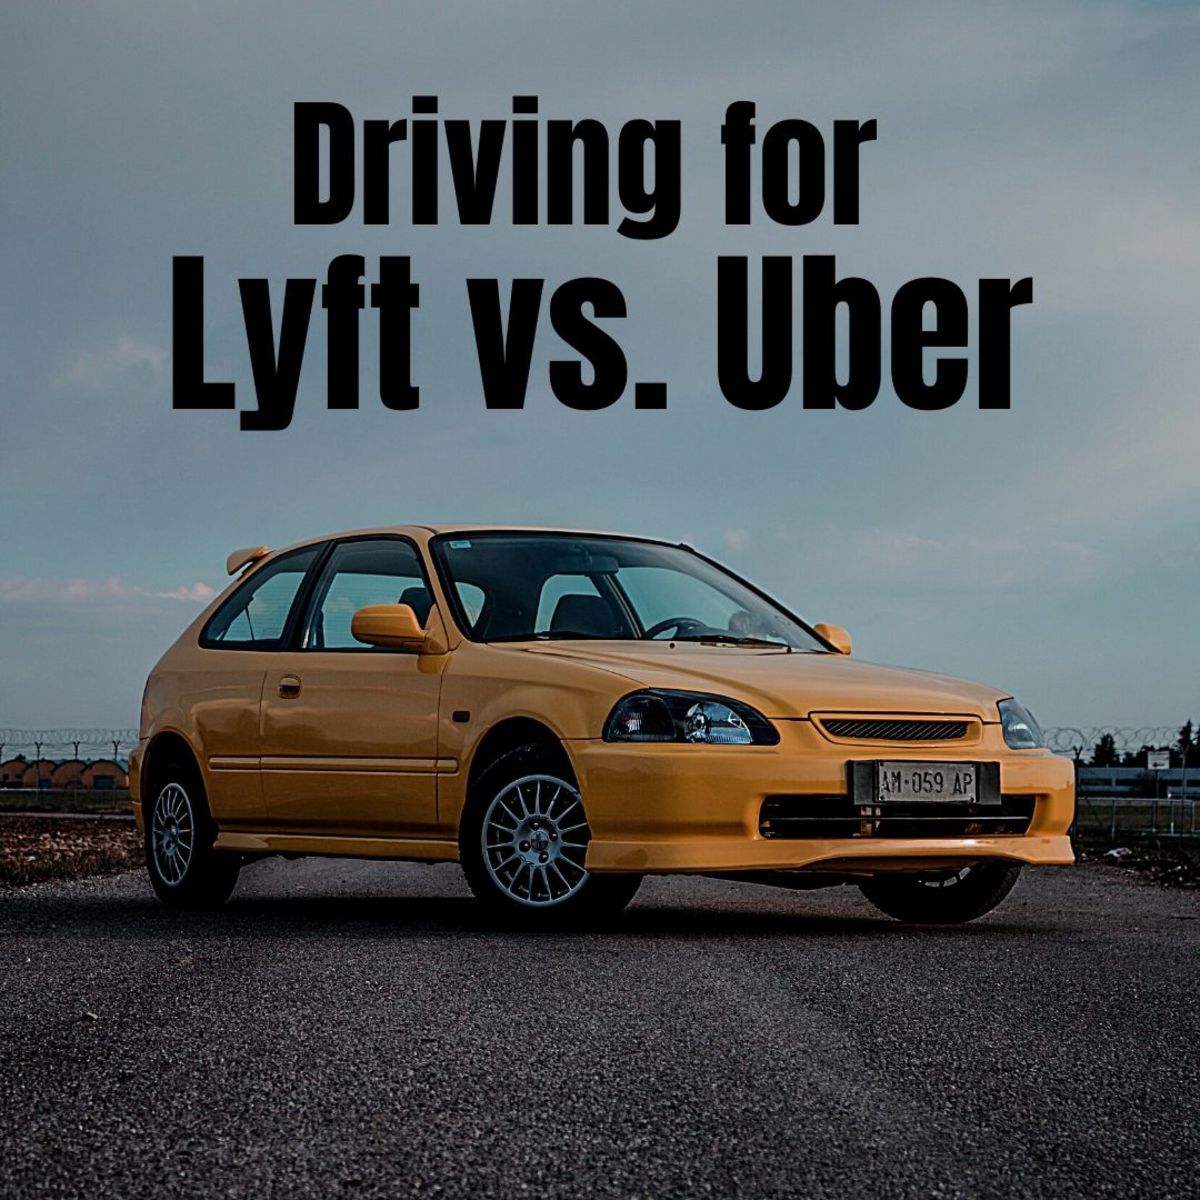 Driving for Uber and Lyft: What's the Difference?